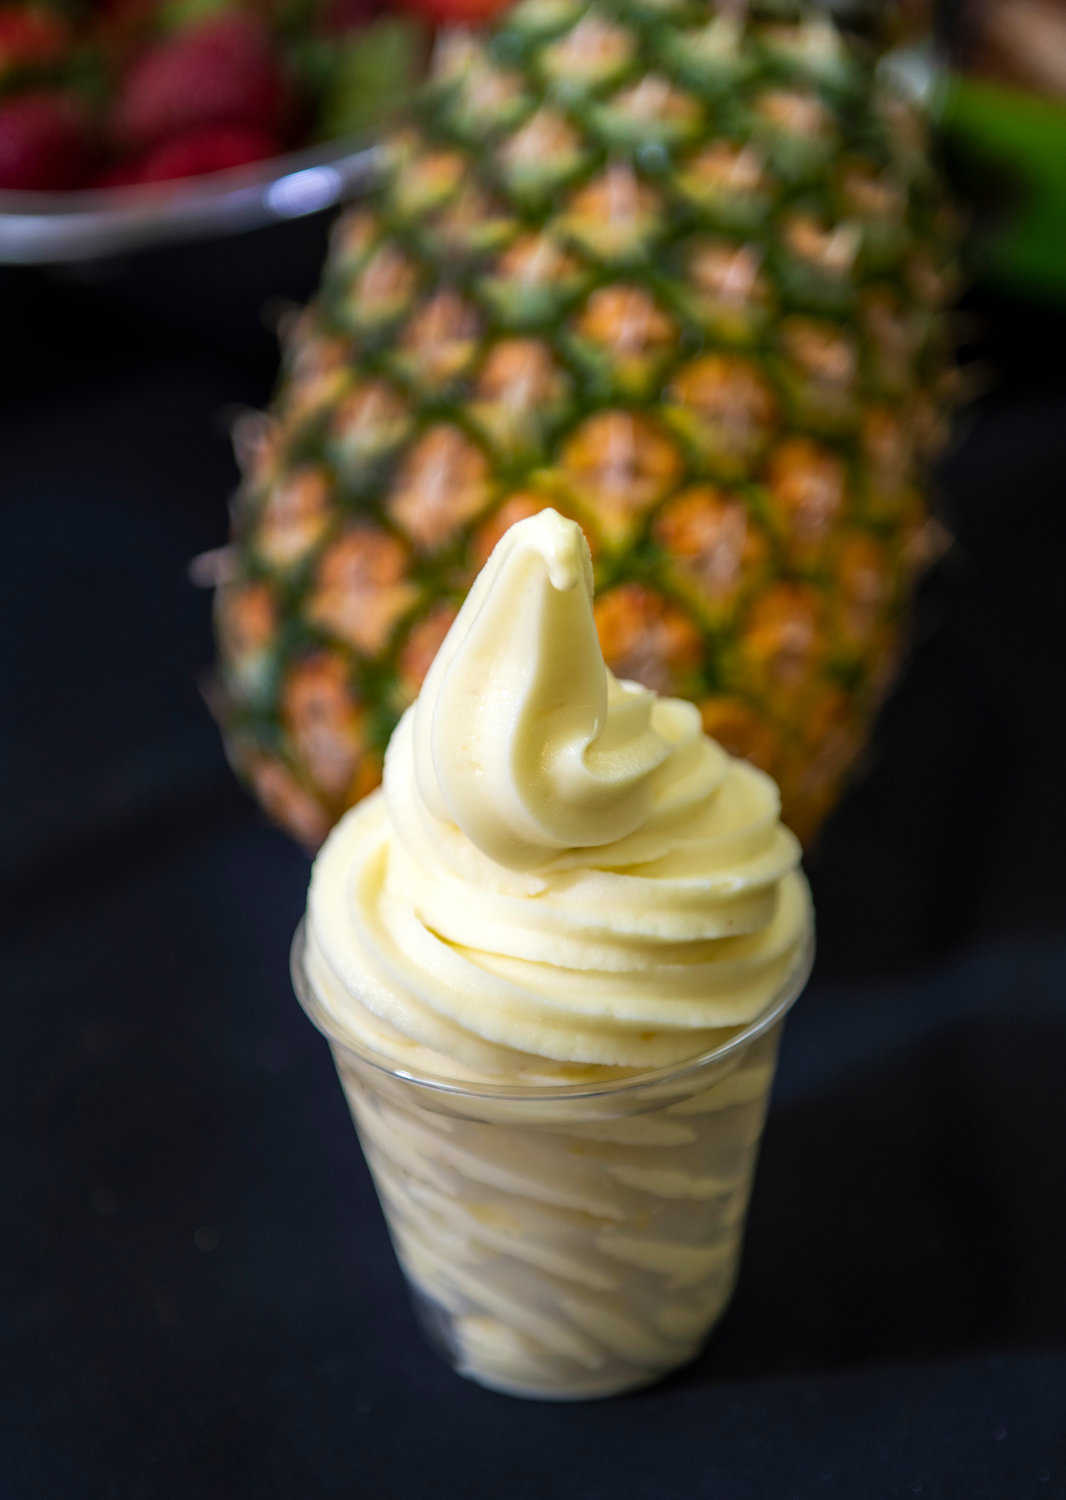 A half-dozen crisp flavors rotate regularly, but strawberry is a best seller. Among other choices are peach, cantaloupe, mango, banana, watermelon, green apple, piña colada, and pineapple.